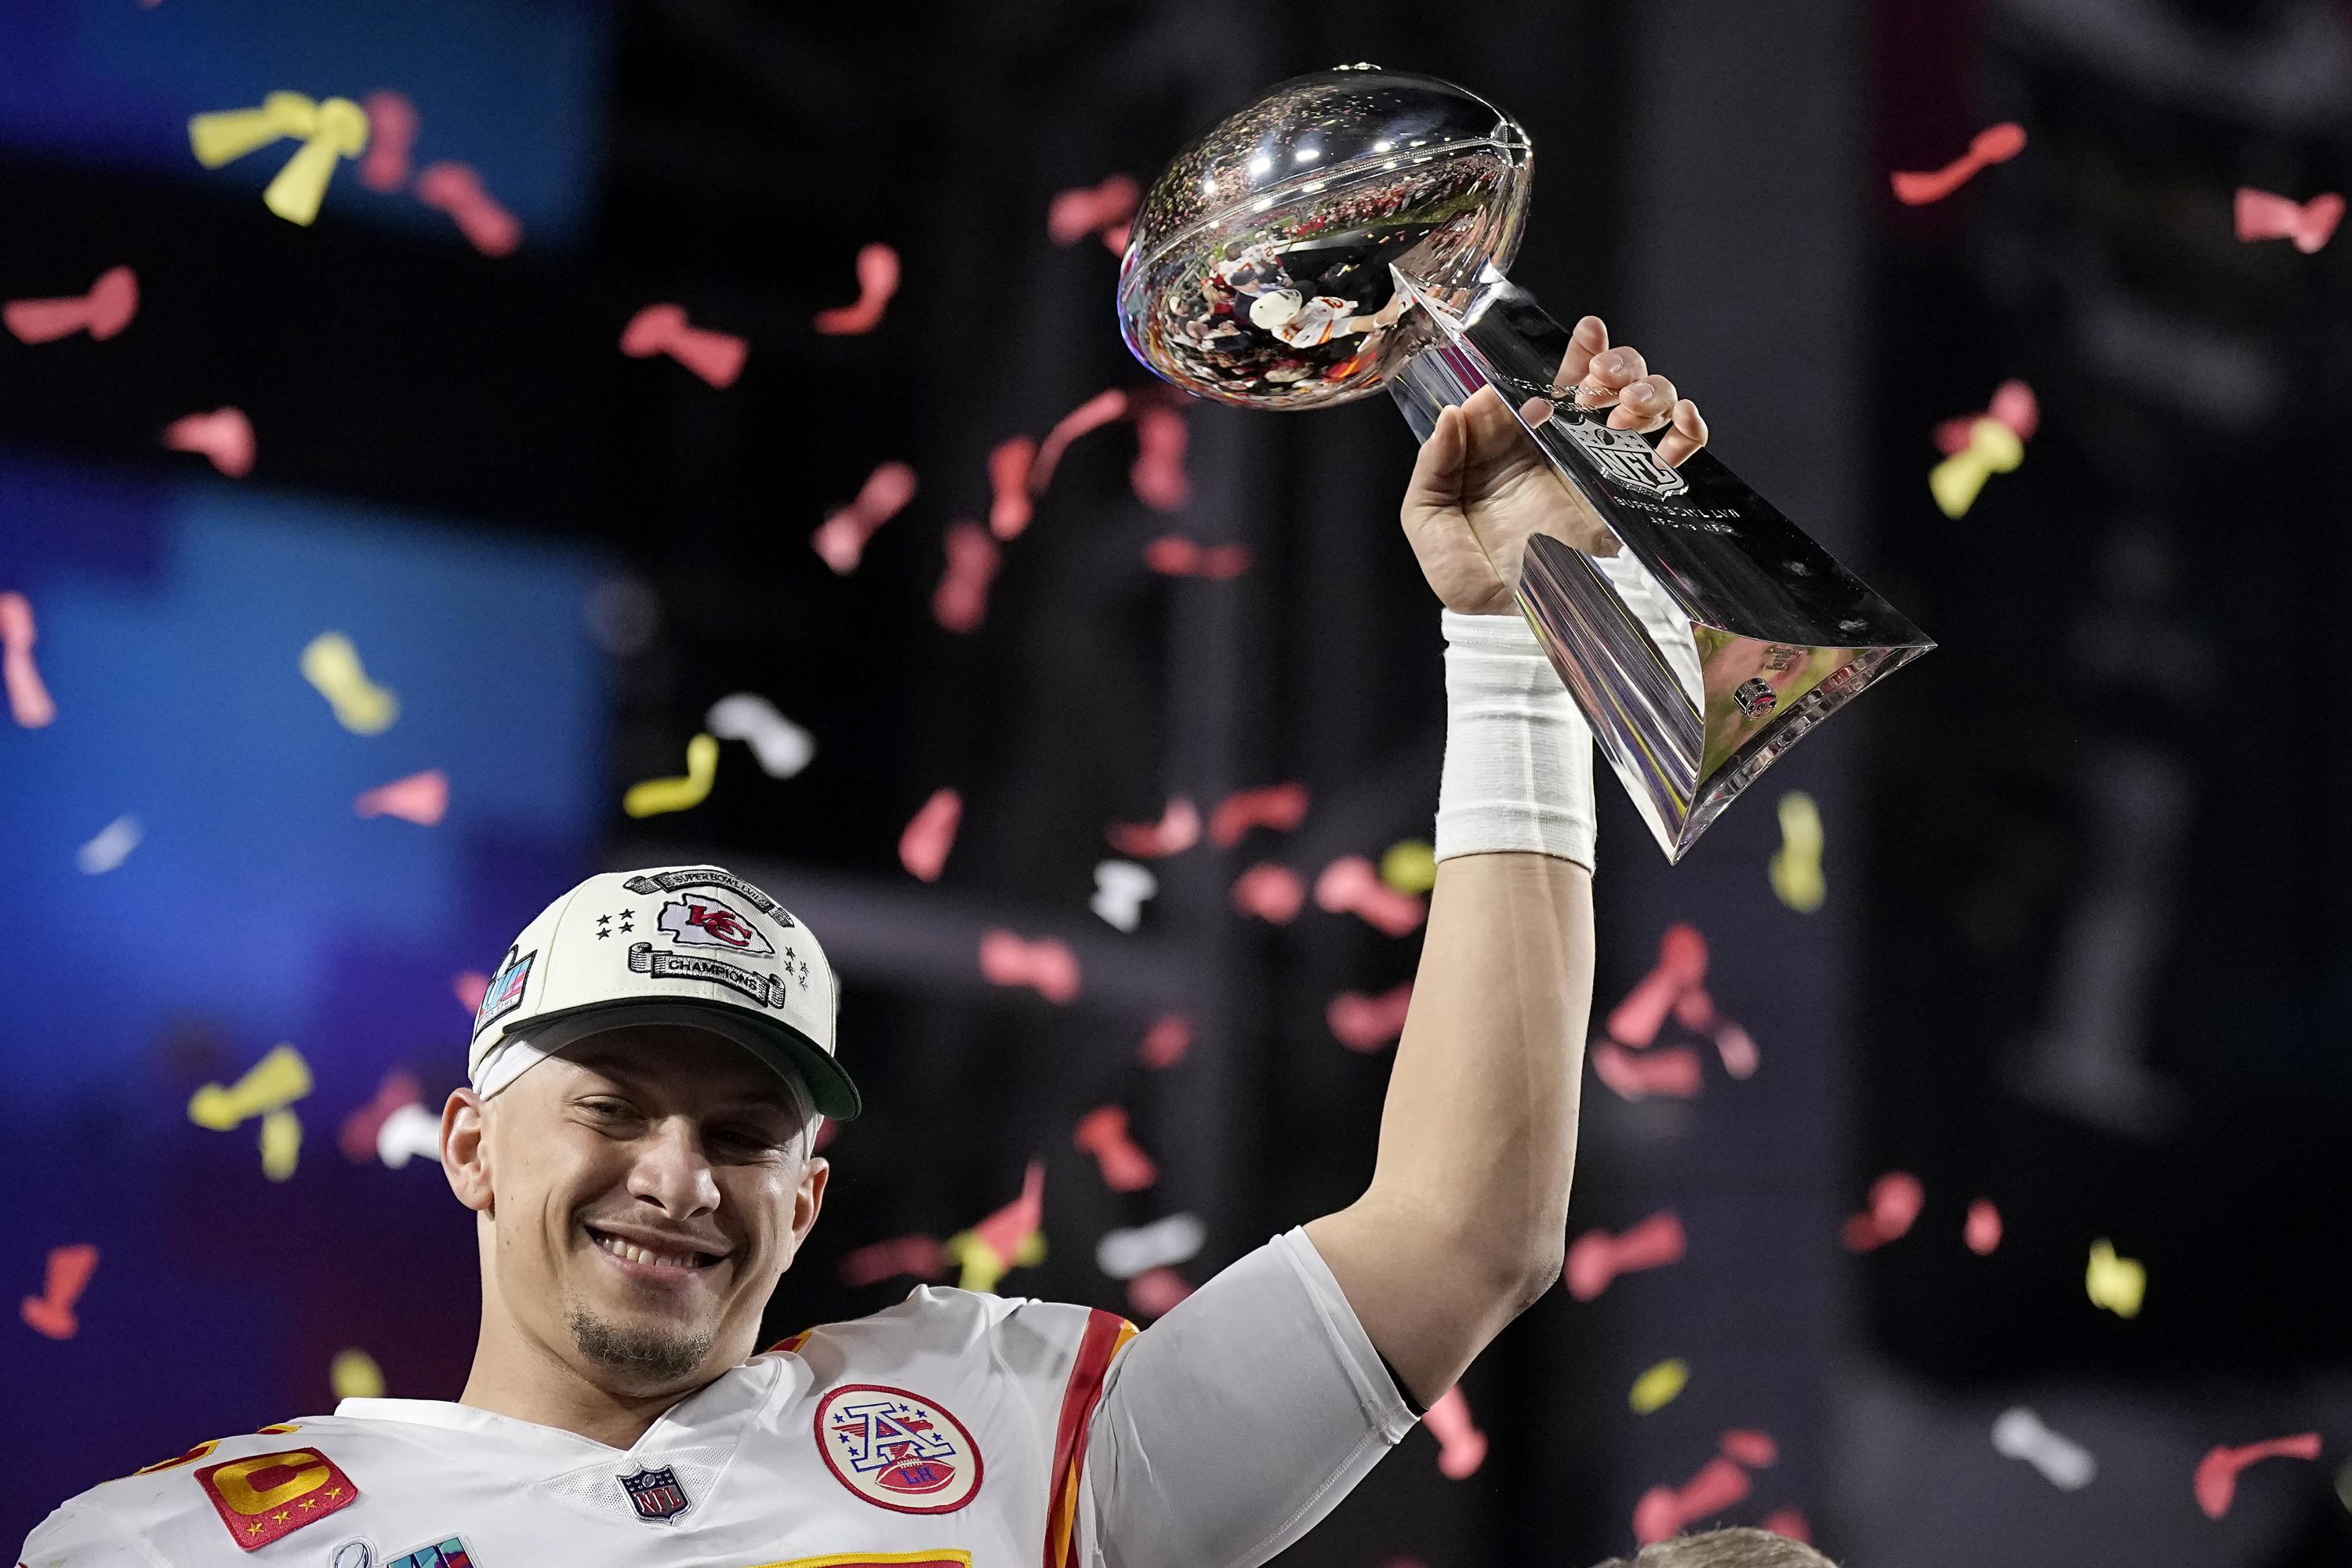 Chiefs News 2/13: The Chiefs are your Super Bowl Champions